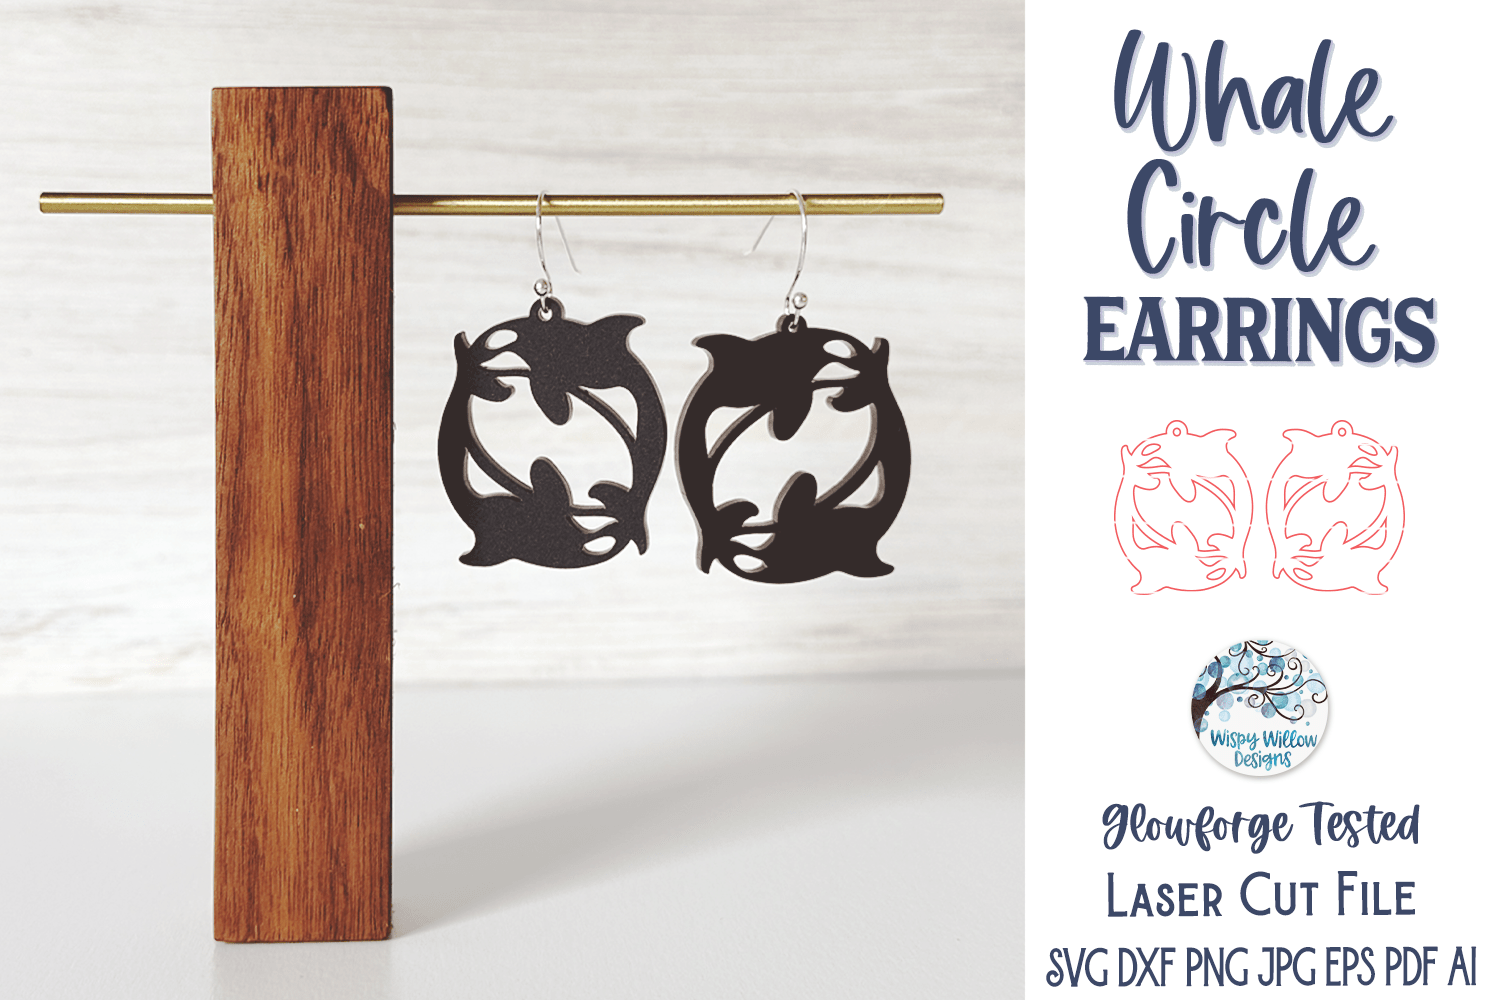 Orca Killer Whale Circle Earring SVG for Glowforge Laser Cutter Wispy Willow Designs Company